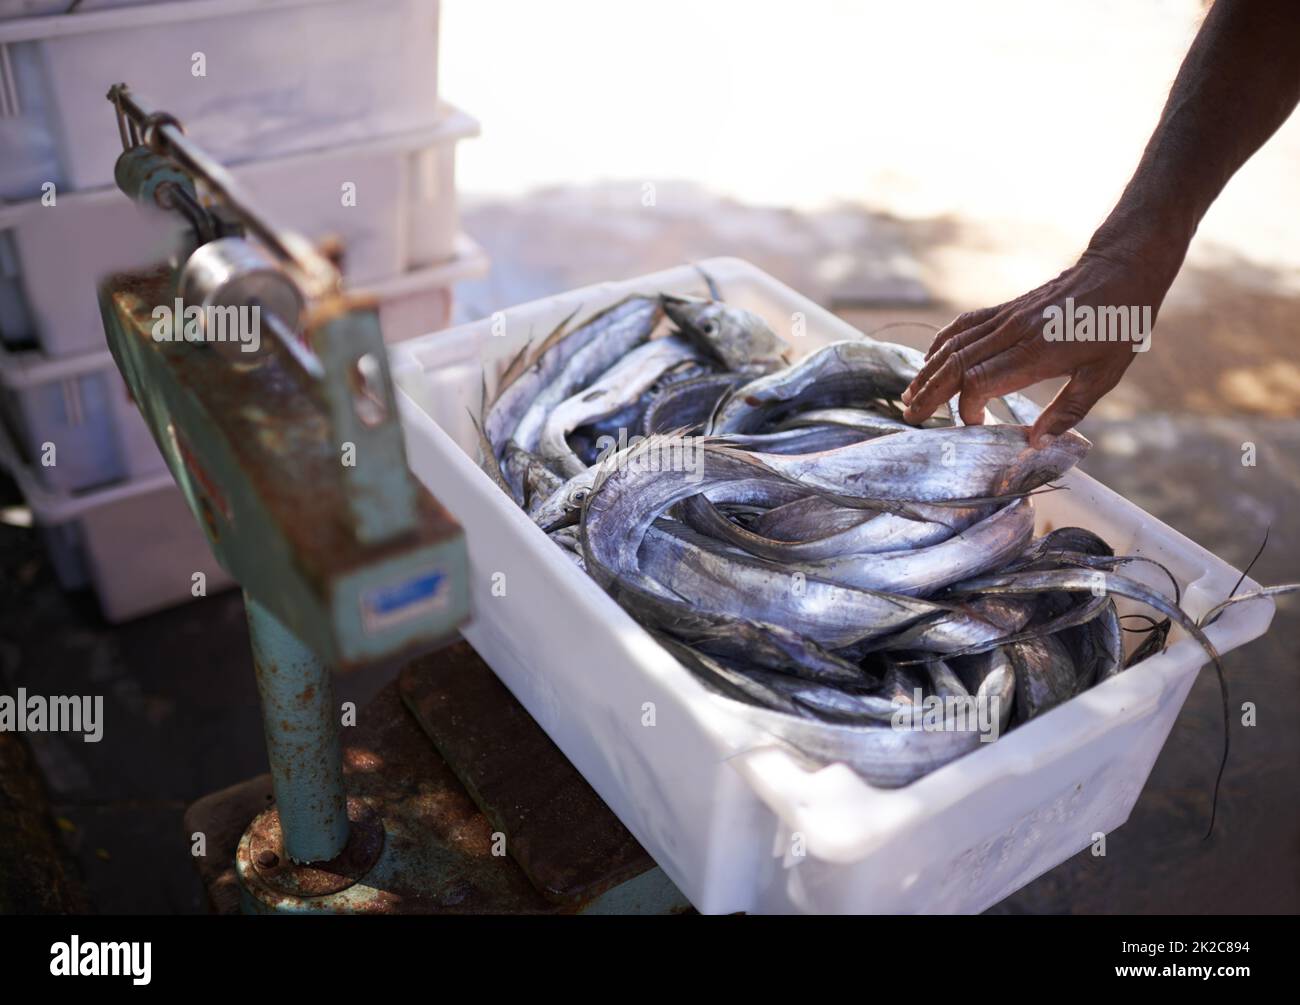 Freshly caught. Cropped shot of a container filled with freshly caught fish. Stock Photo